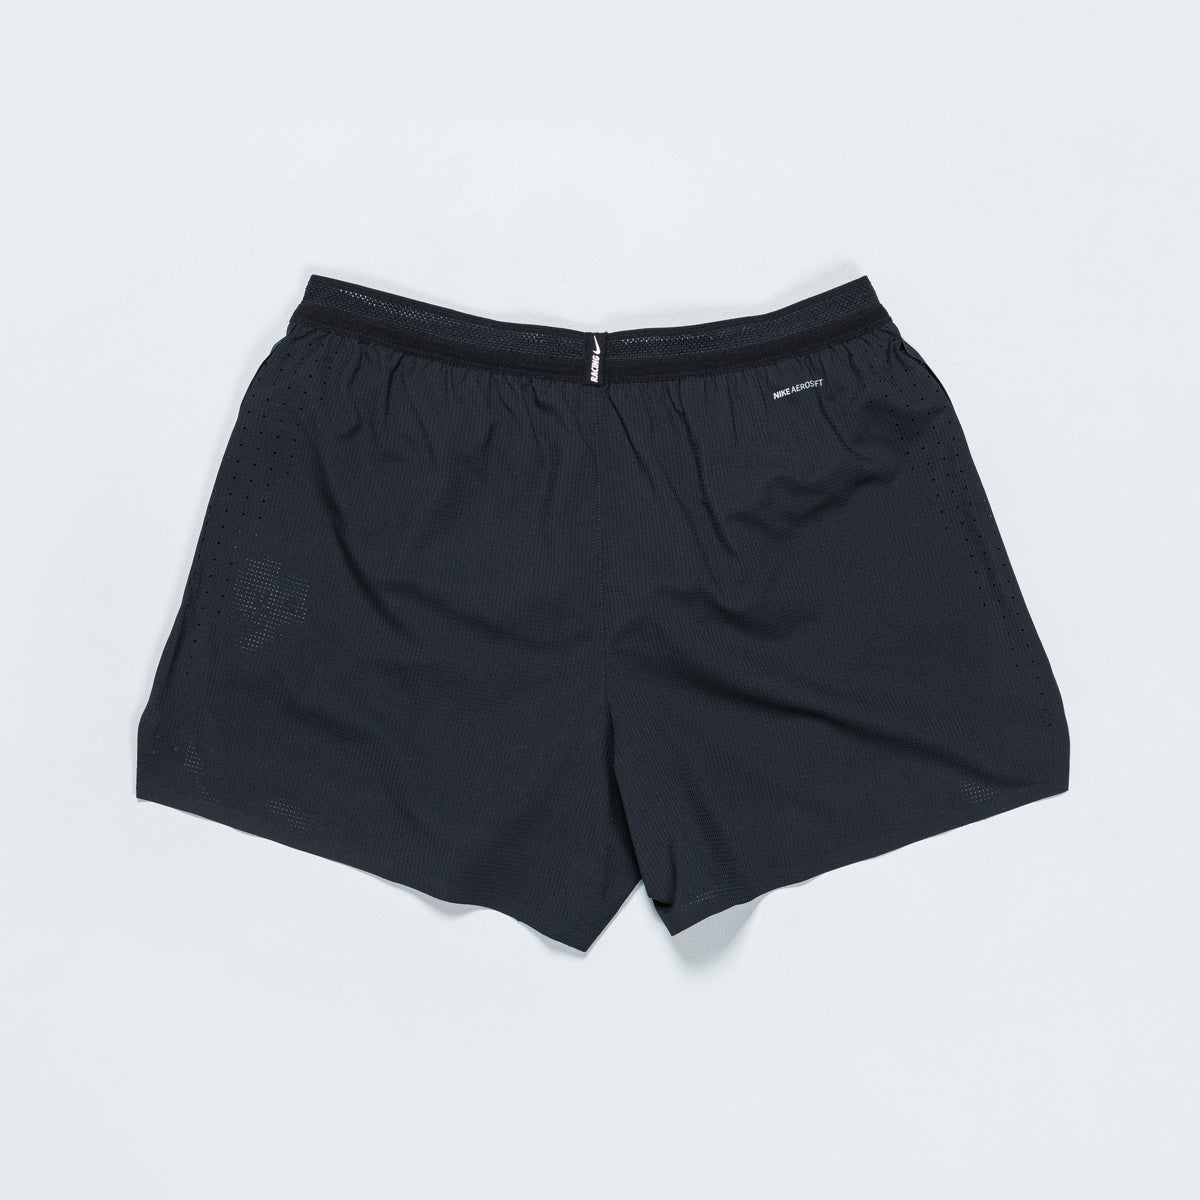 AeroSwift 4In Short - Black/White | Up There Athletics